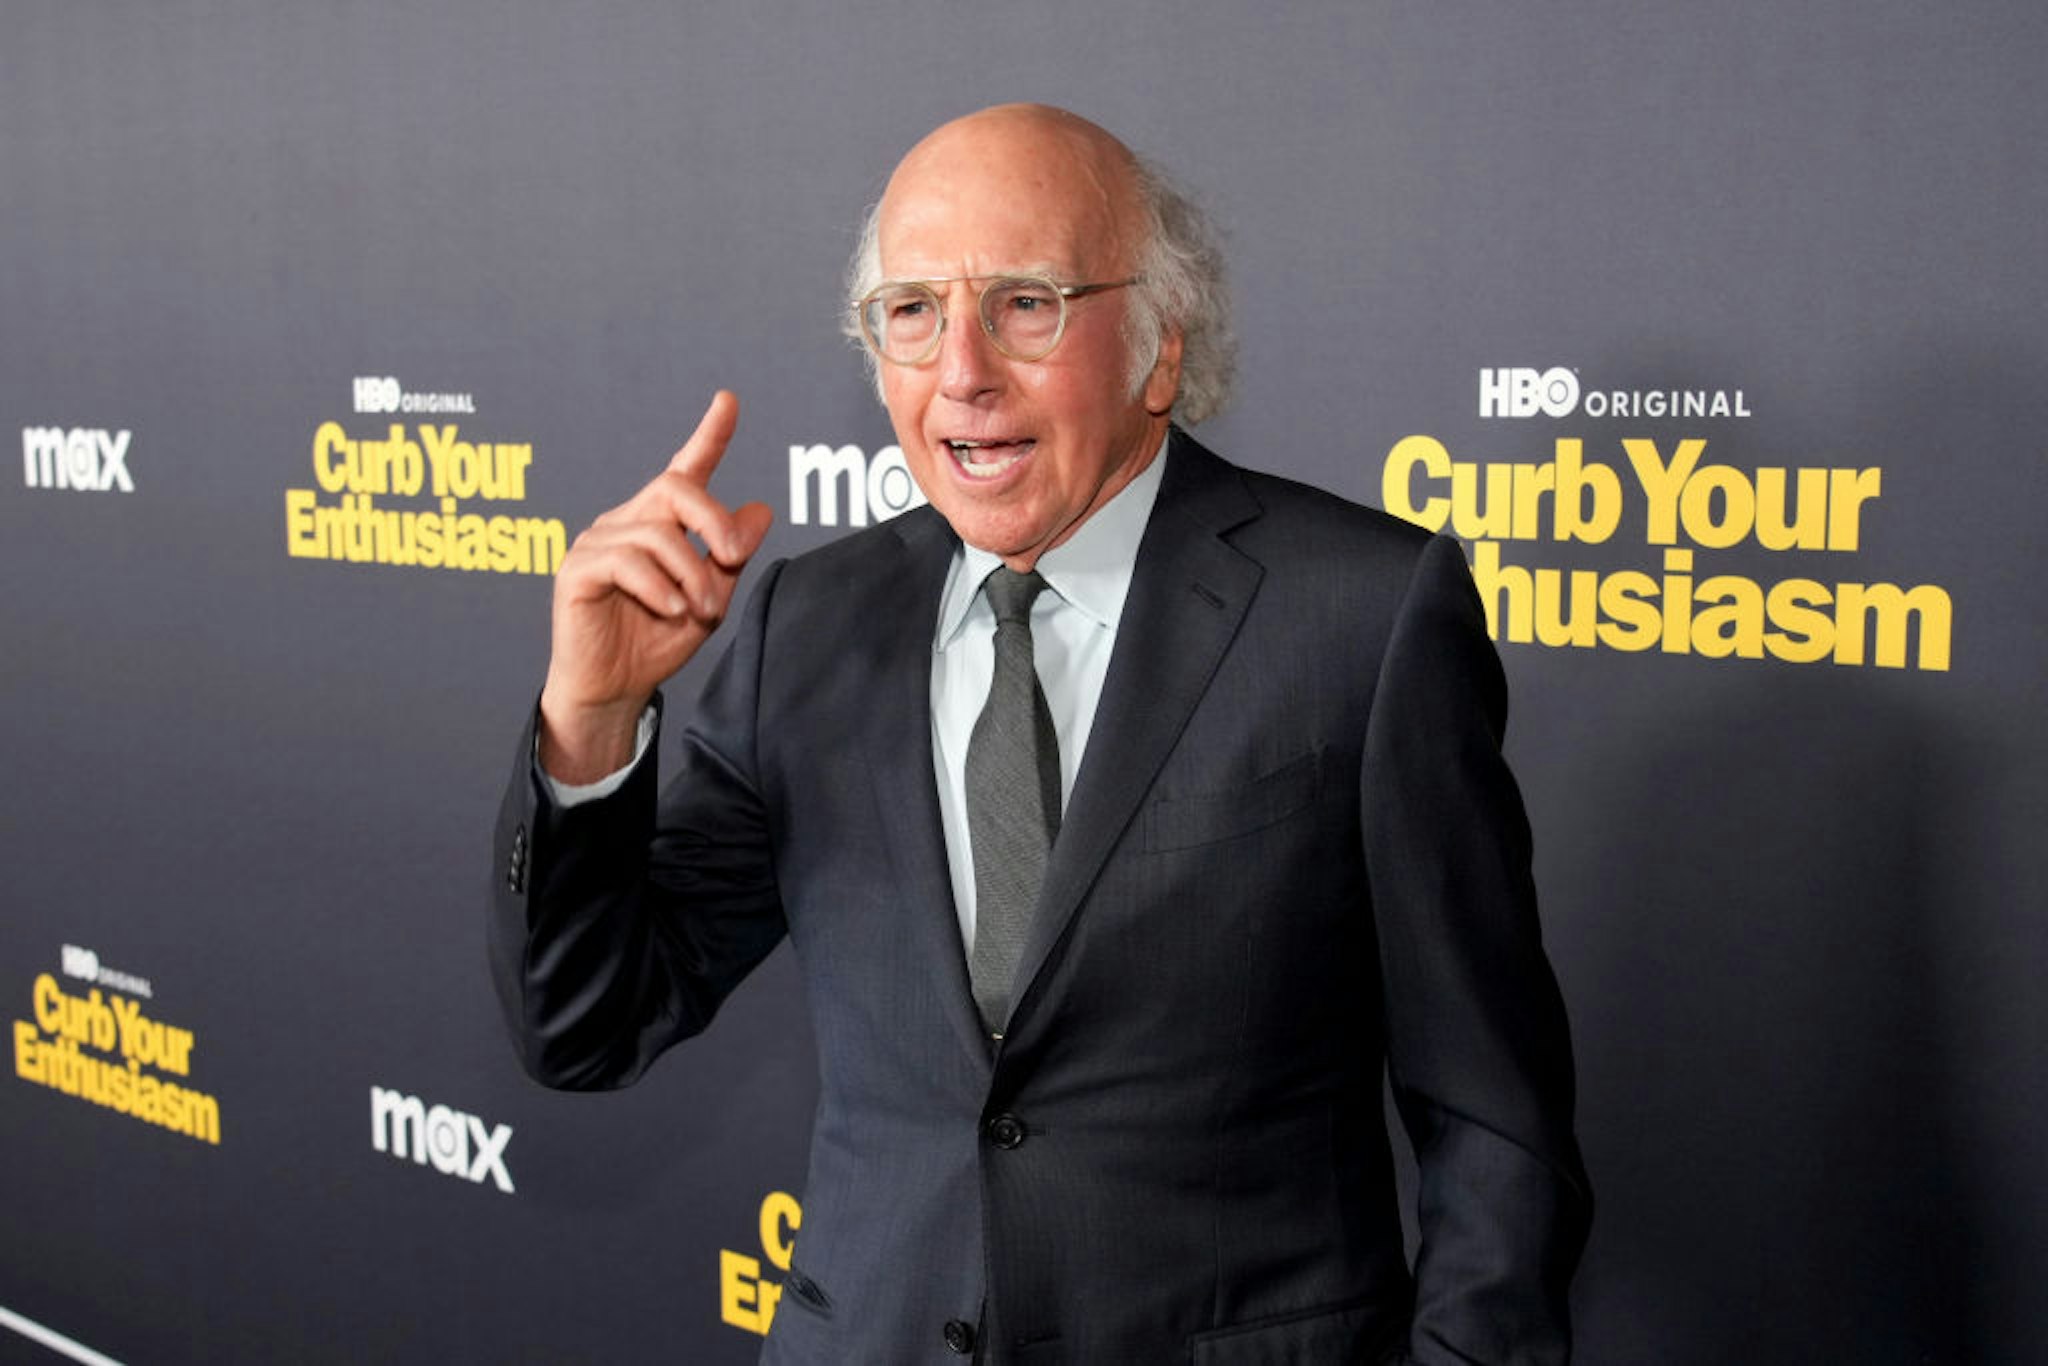 LOS ANGELES, CALIFORNIA - JANUARY 30: Larry David attends the Curb Your Enthusiasm Season 12 premiere at DGA Theater Complex on January 30, 2024 in Los Angeles, California. (Photo by Jeff Kravitz/FilmMagic for HBO)